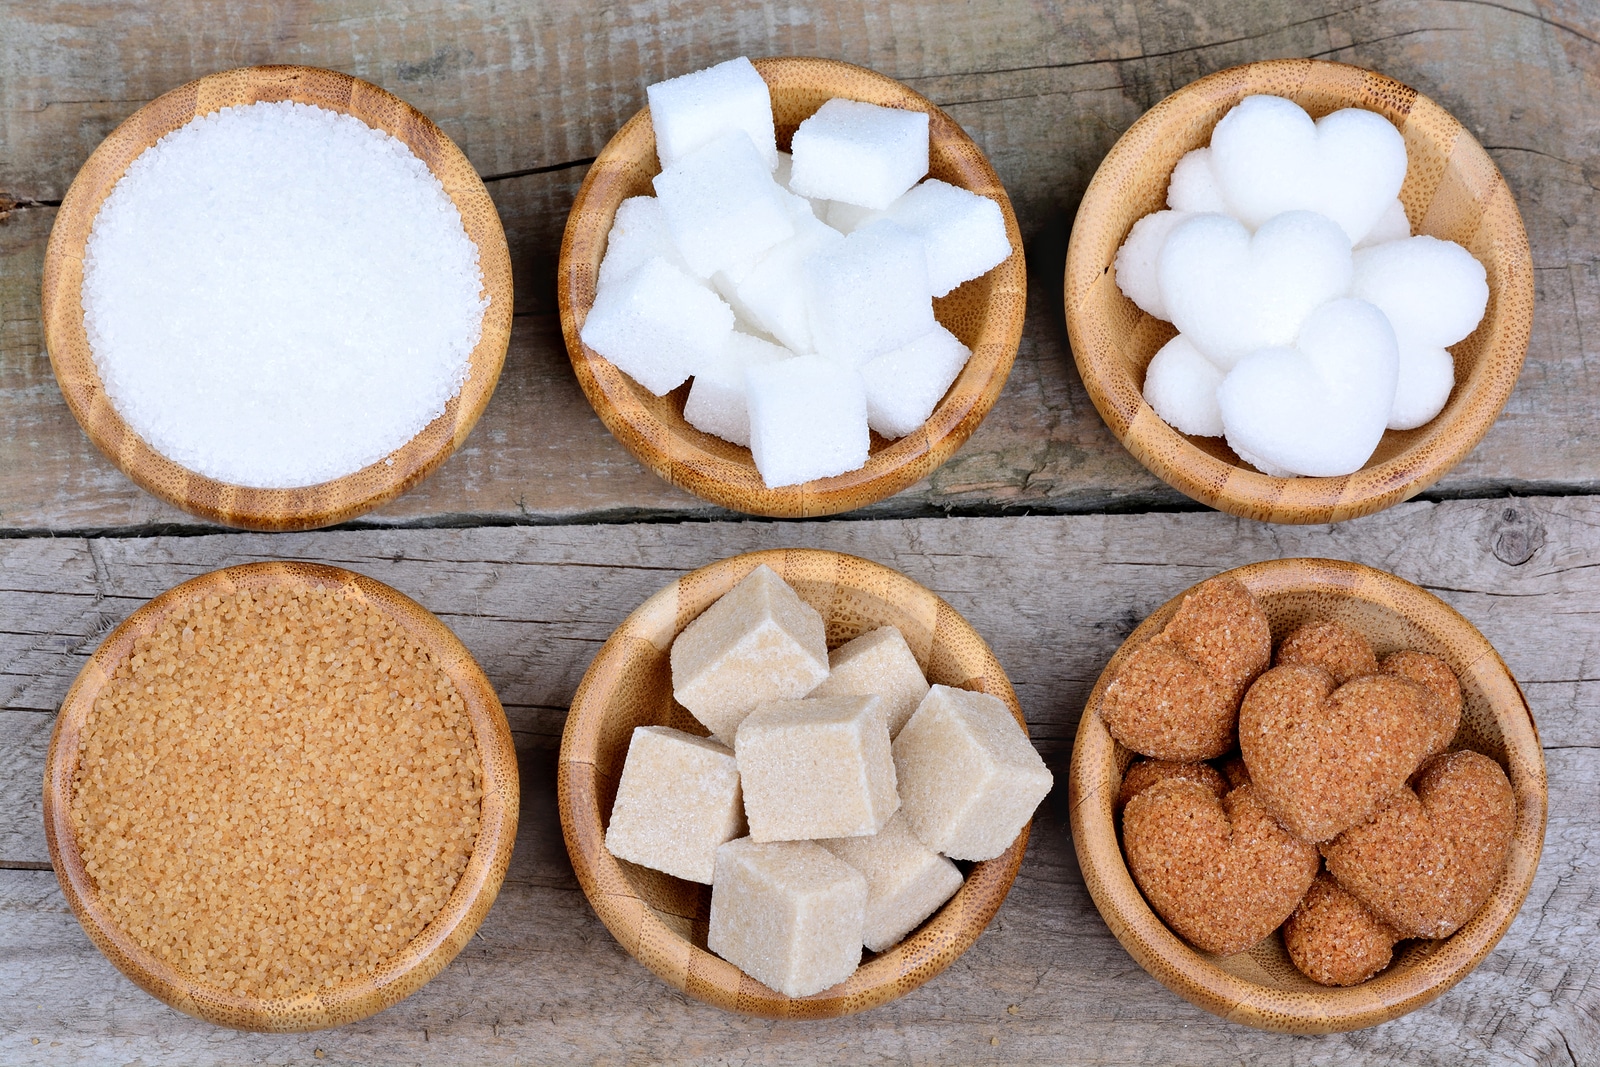 The Types of Sugar – Are All Sugars Created Equal?